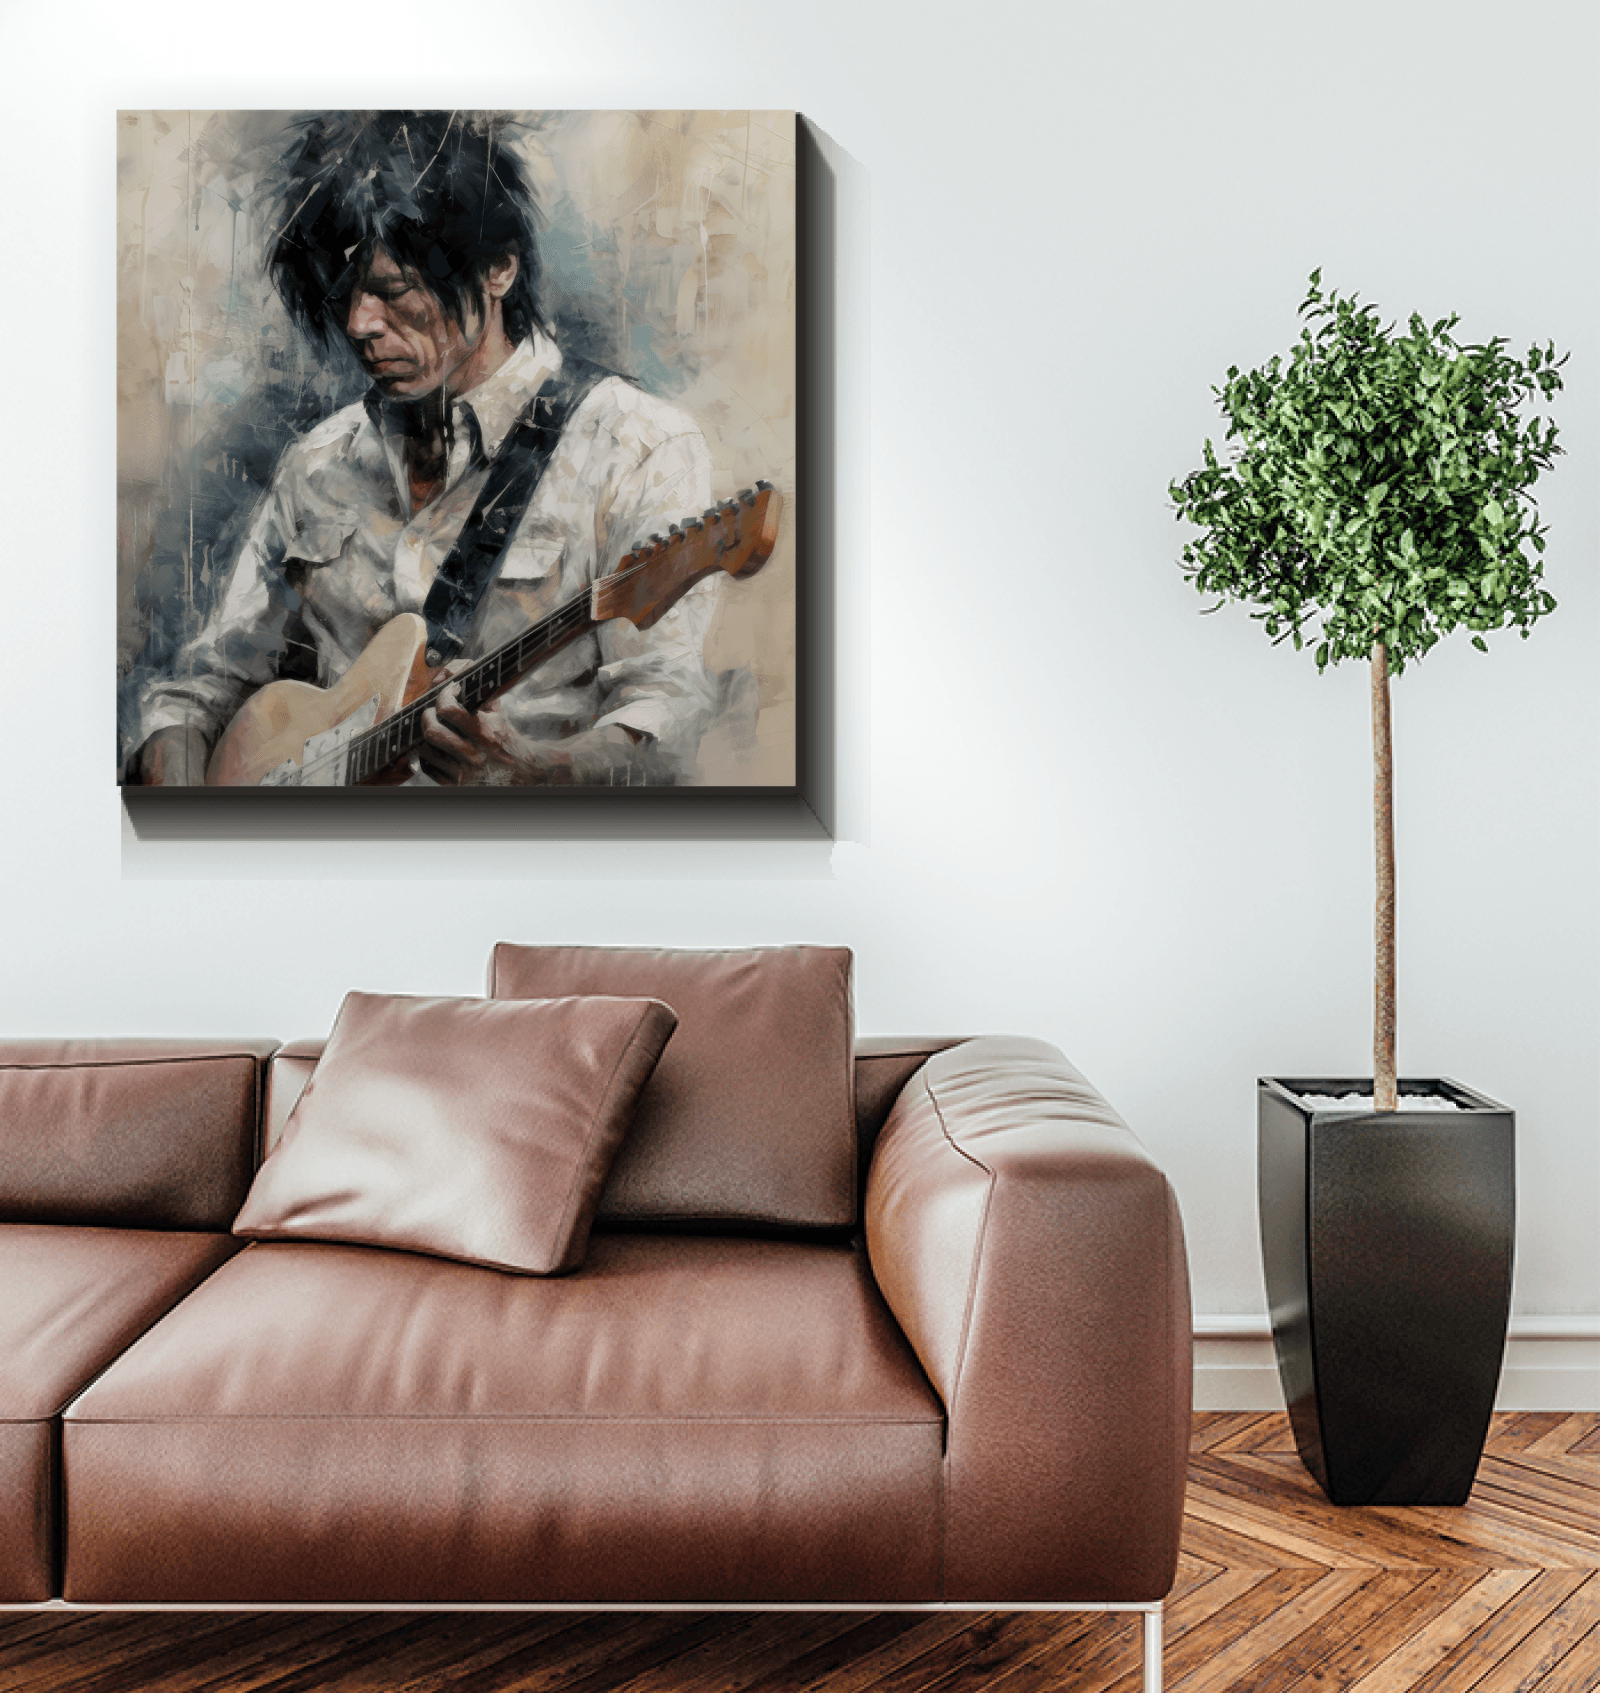 Strumming Star canvas for music lovers